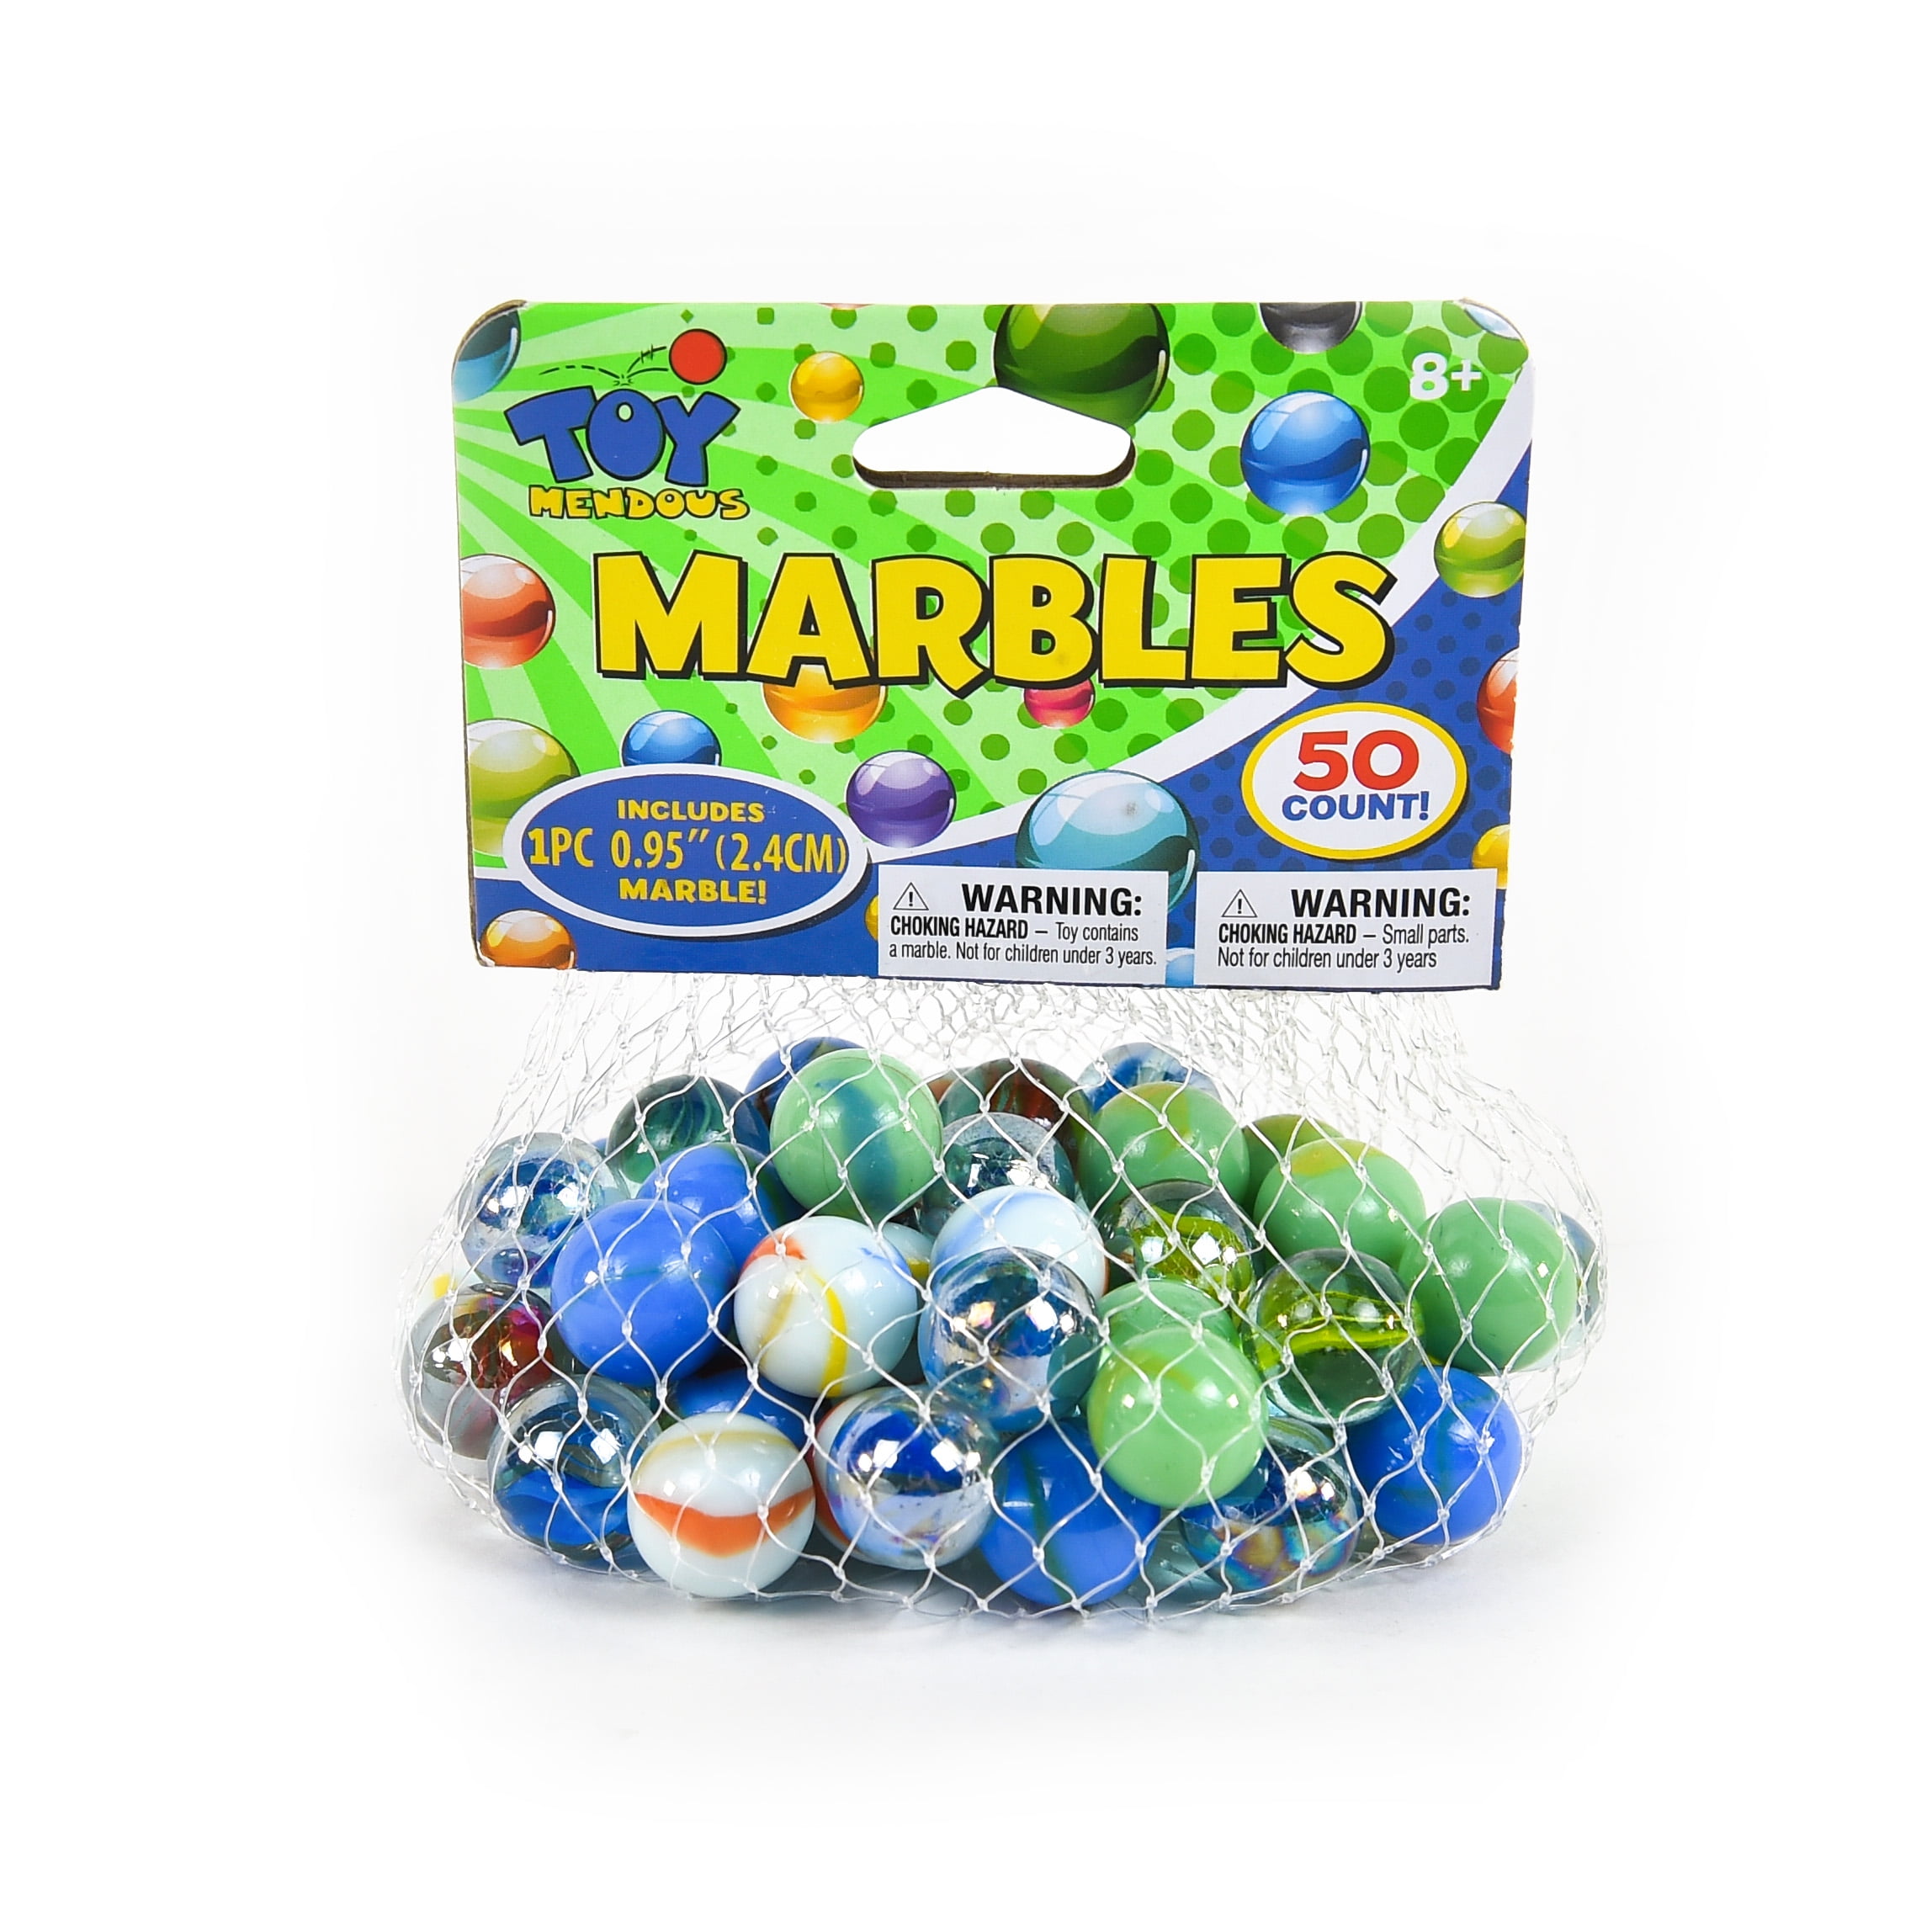 Bag of 50 Marbles Includes 1 Super Shooter Imperial Toy Marbles 